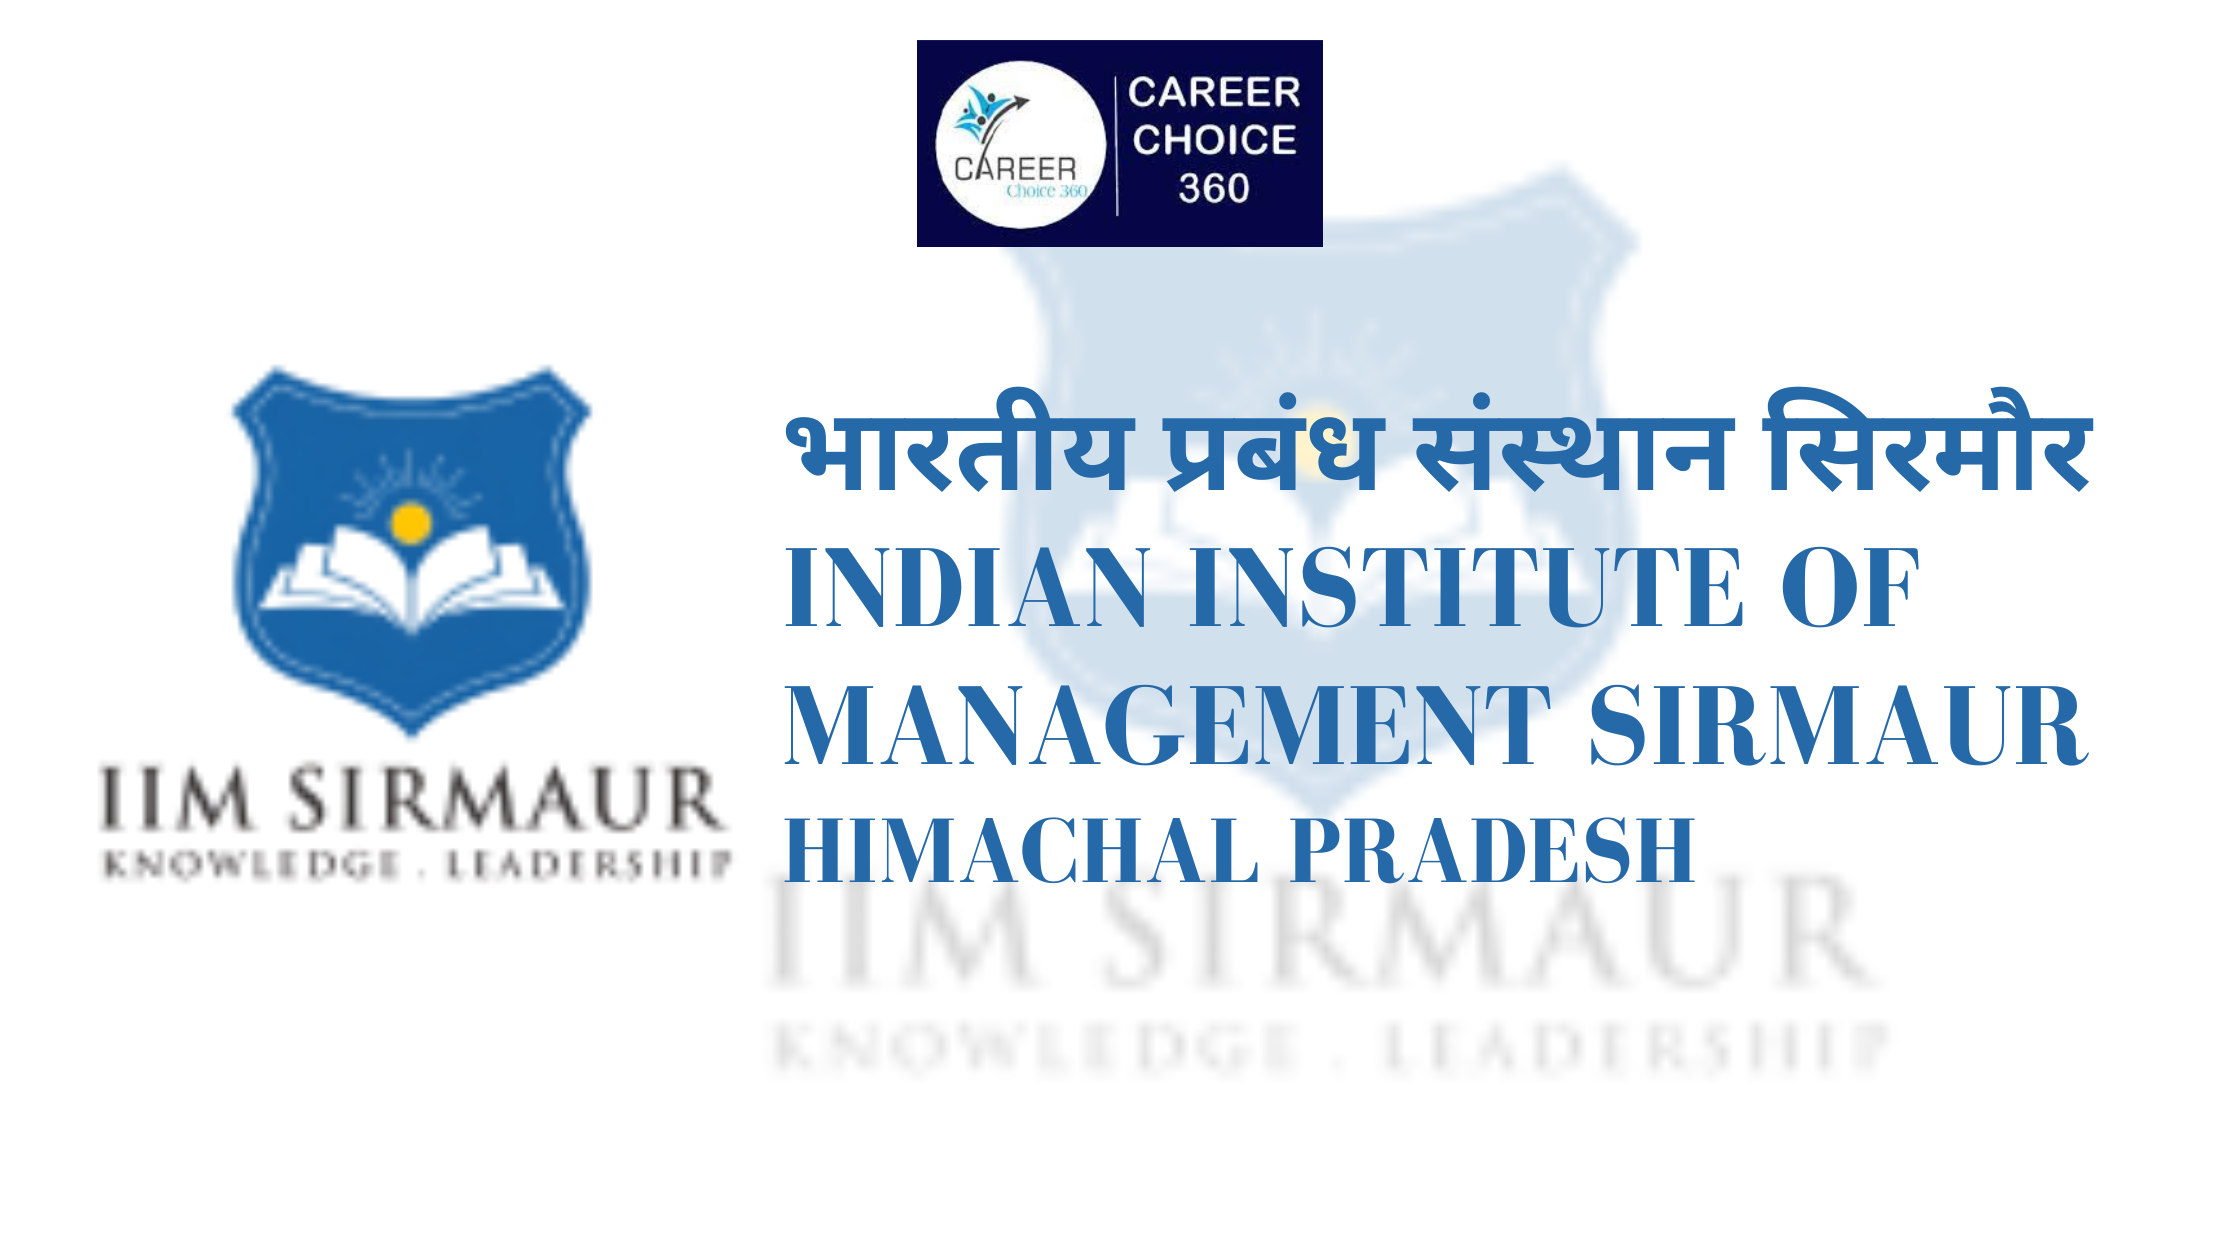 You are currently viewing Indian Institute Of Management of Sirmaur ( IIM Sirmaur ) : Highlights, Important dates, Course & Fees, Admission procedure, Rankings, and Placements